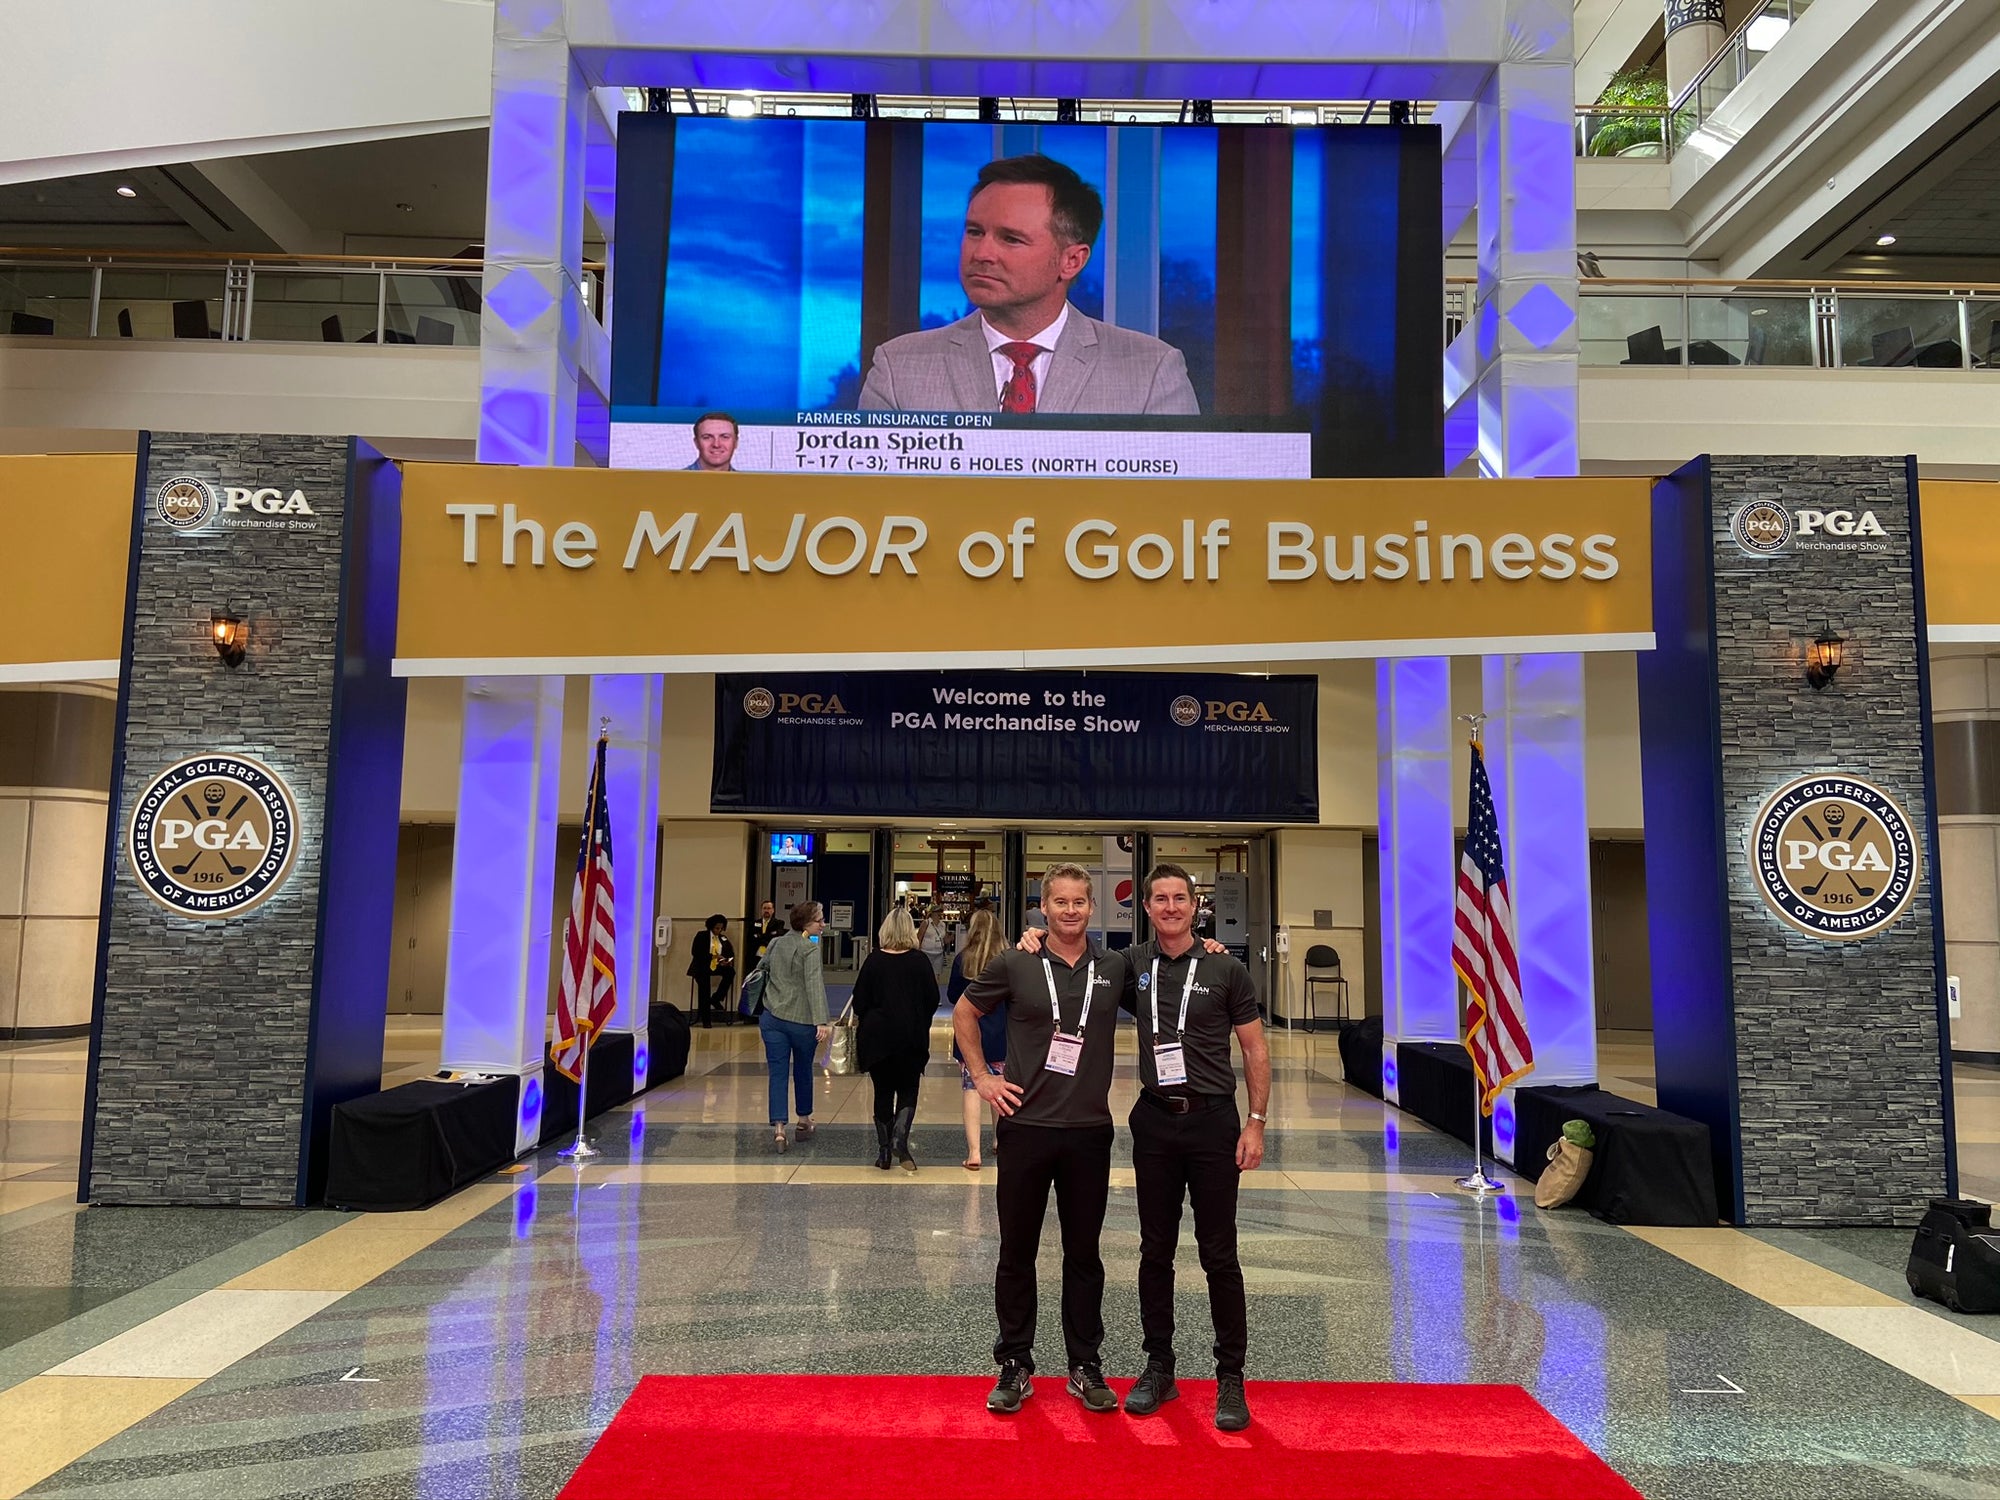 Our PGA Show experience